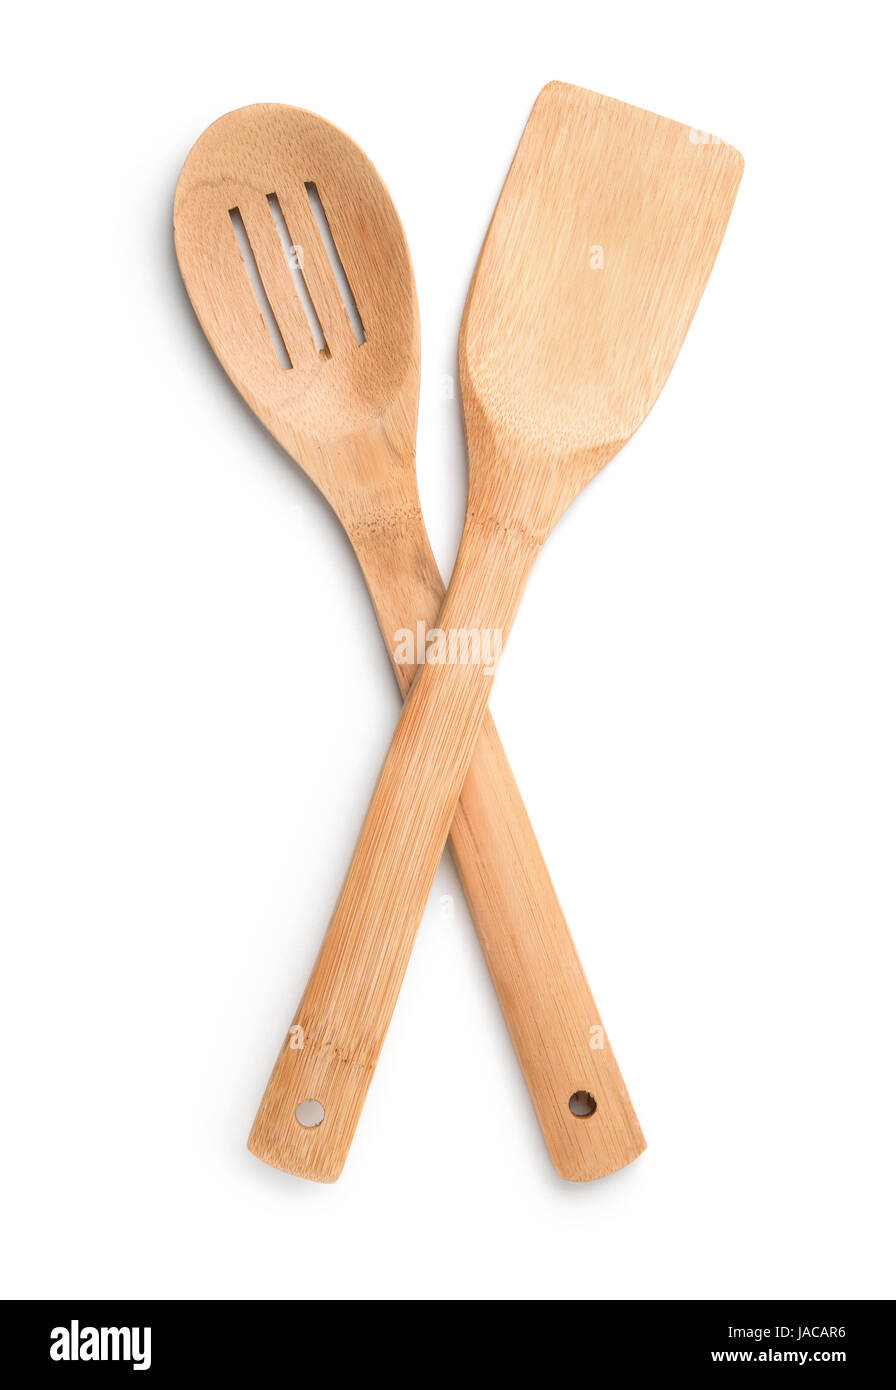 Top view of wooden kitchen spoon and spatula isolated on white Stock Photo